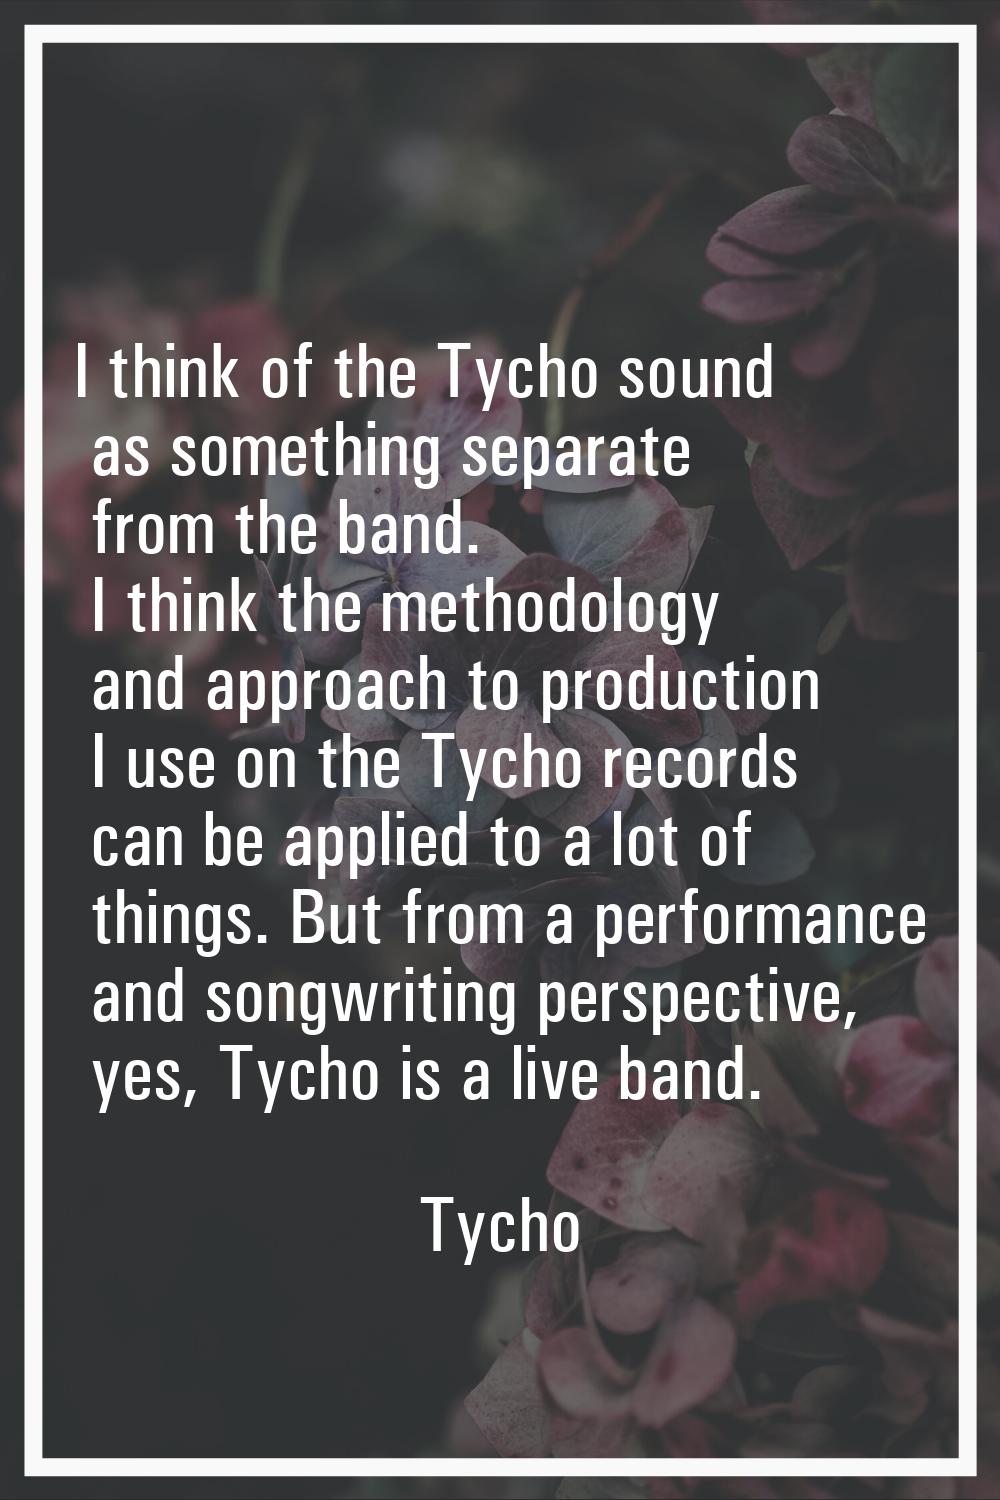 I think of the Tycho sound as something separate from the band. I think the methodology and approac